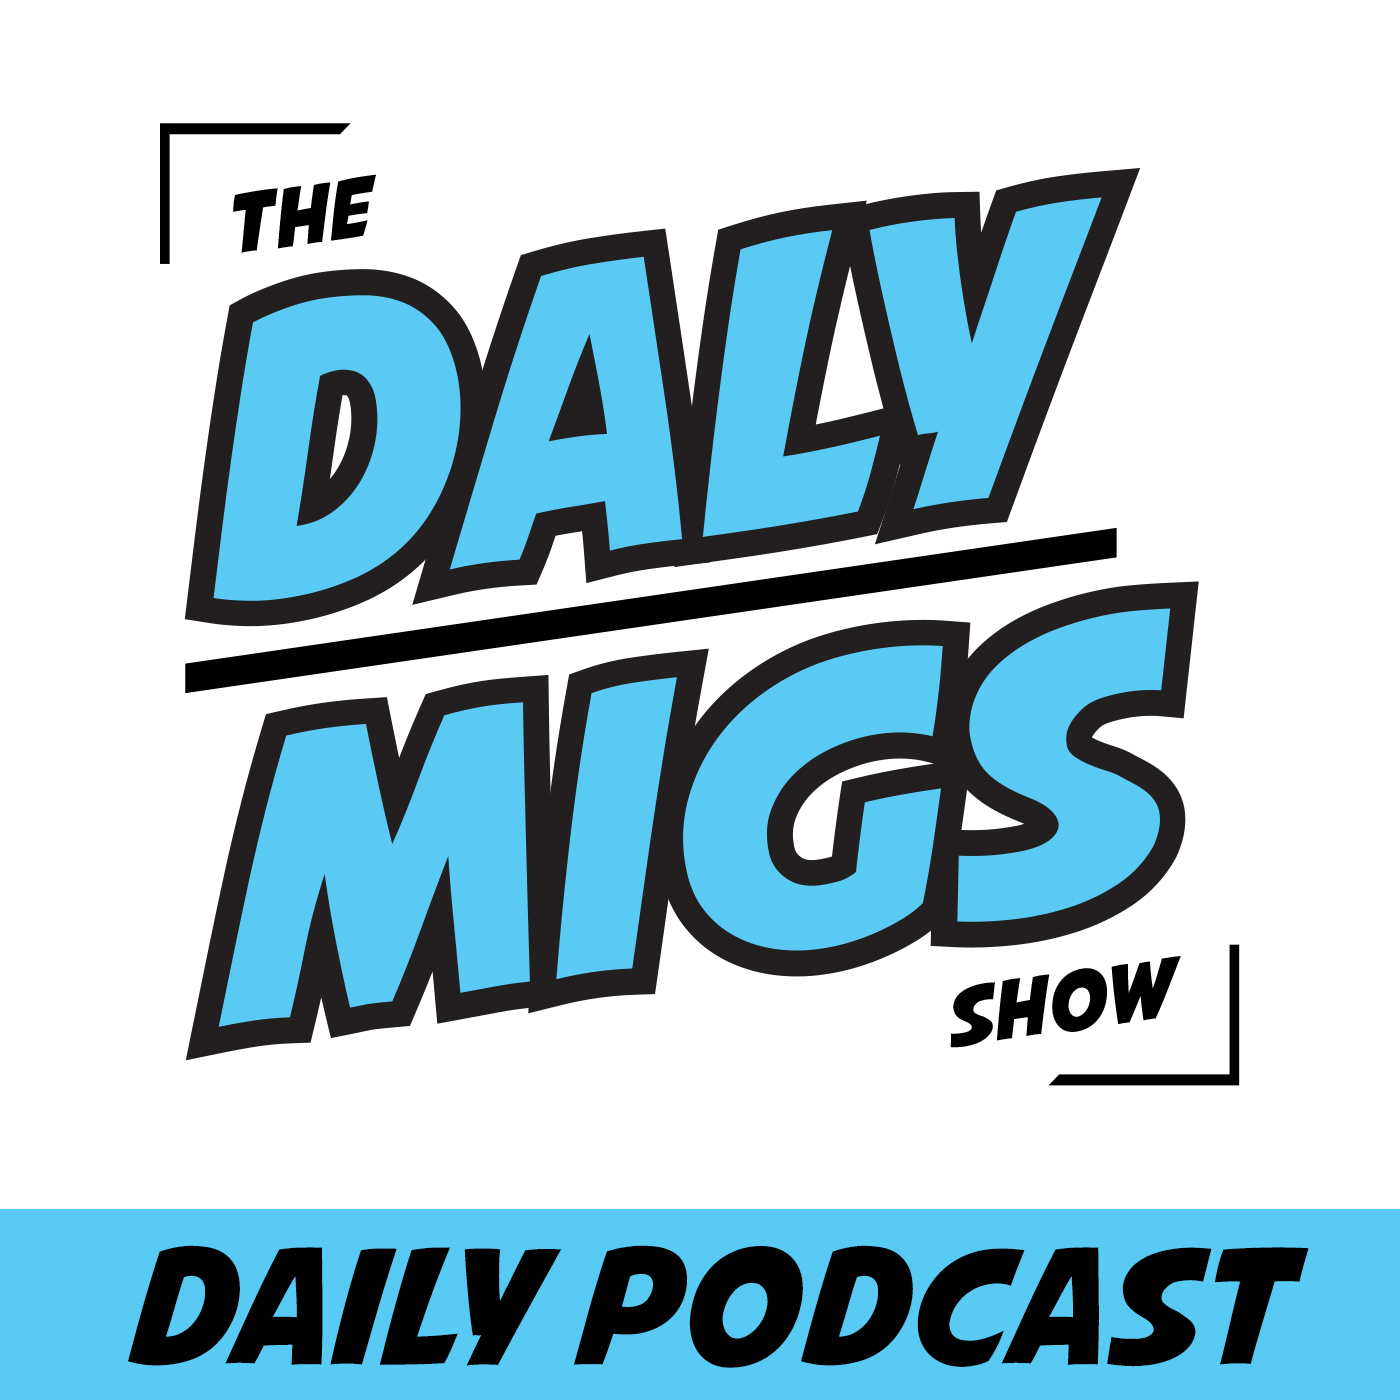 Daily Podcast pt. 2 - "What do you waste money on?"